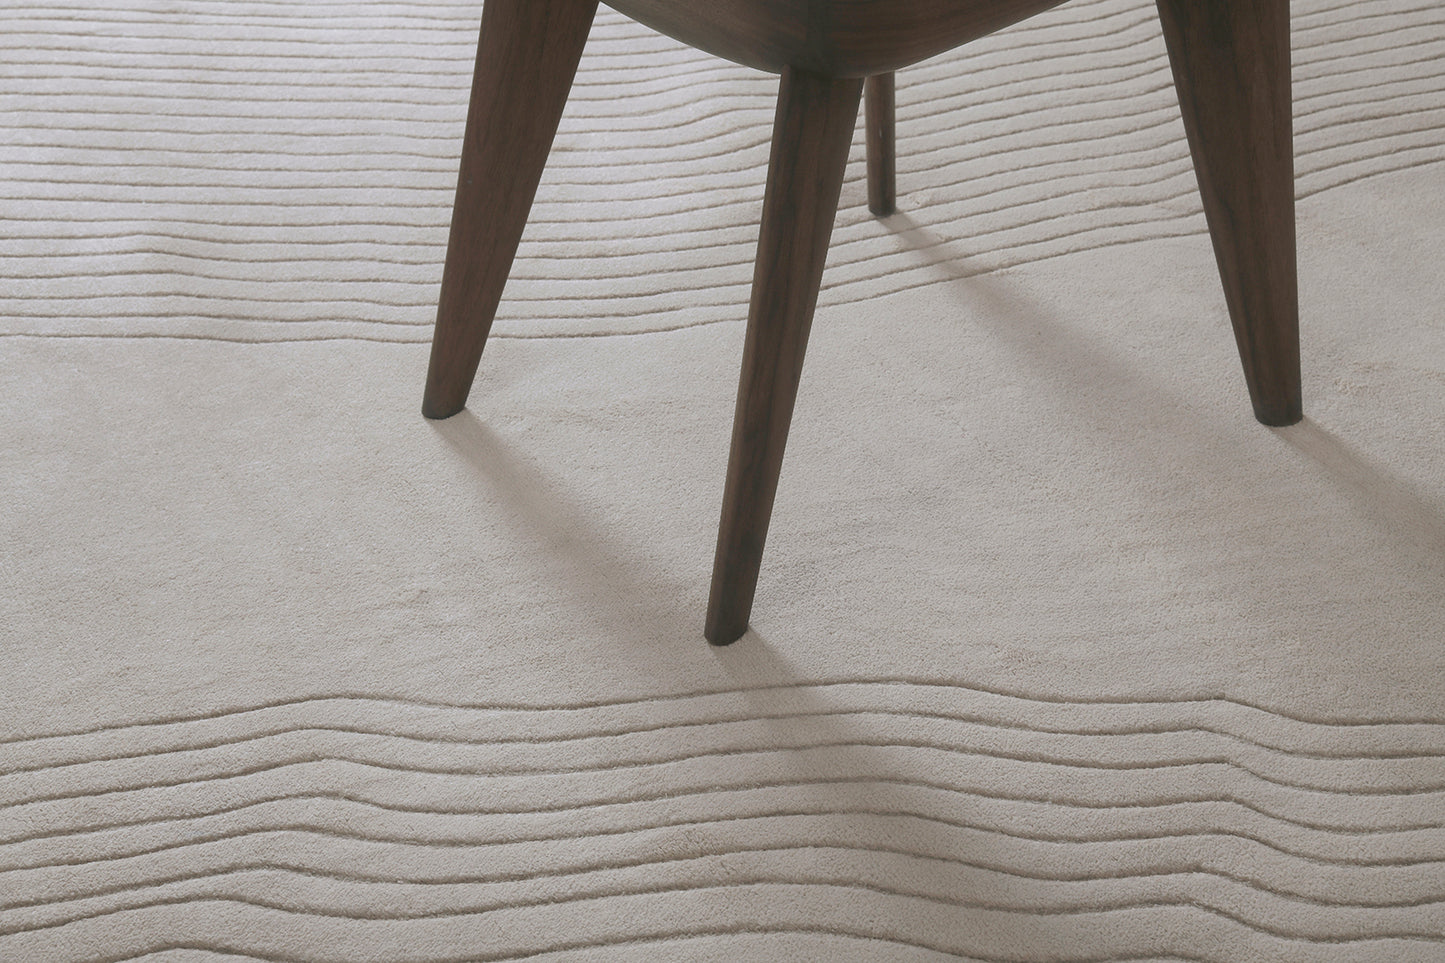 Modern Rug Image 9744 Sands by Claudia Afshar